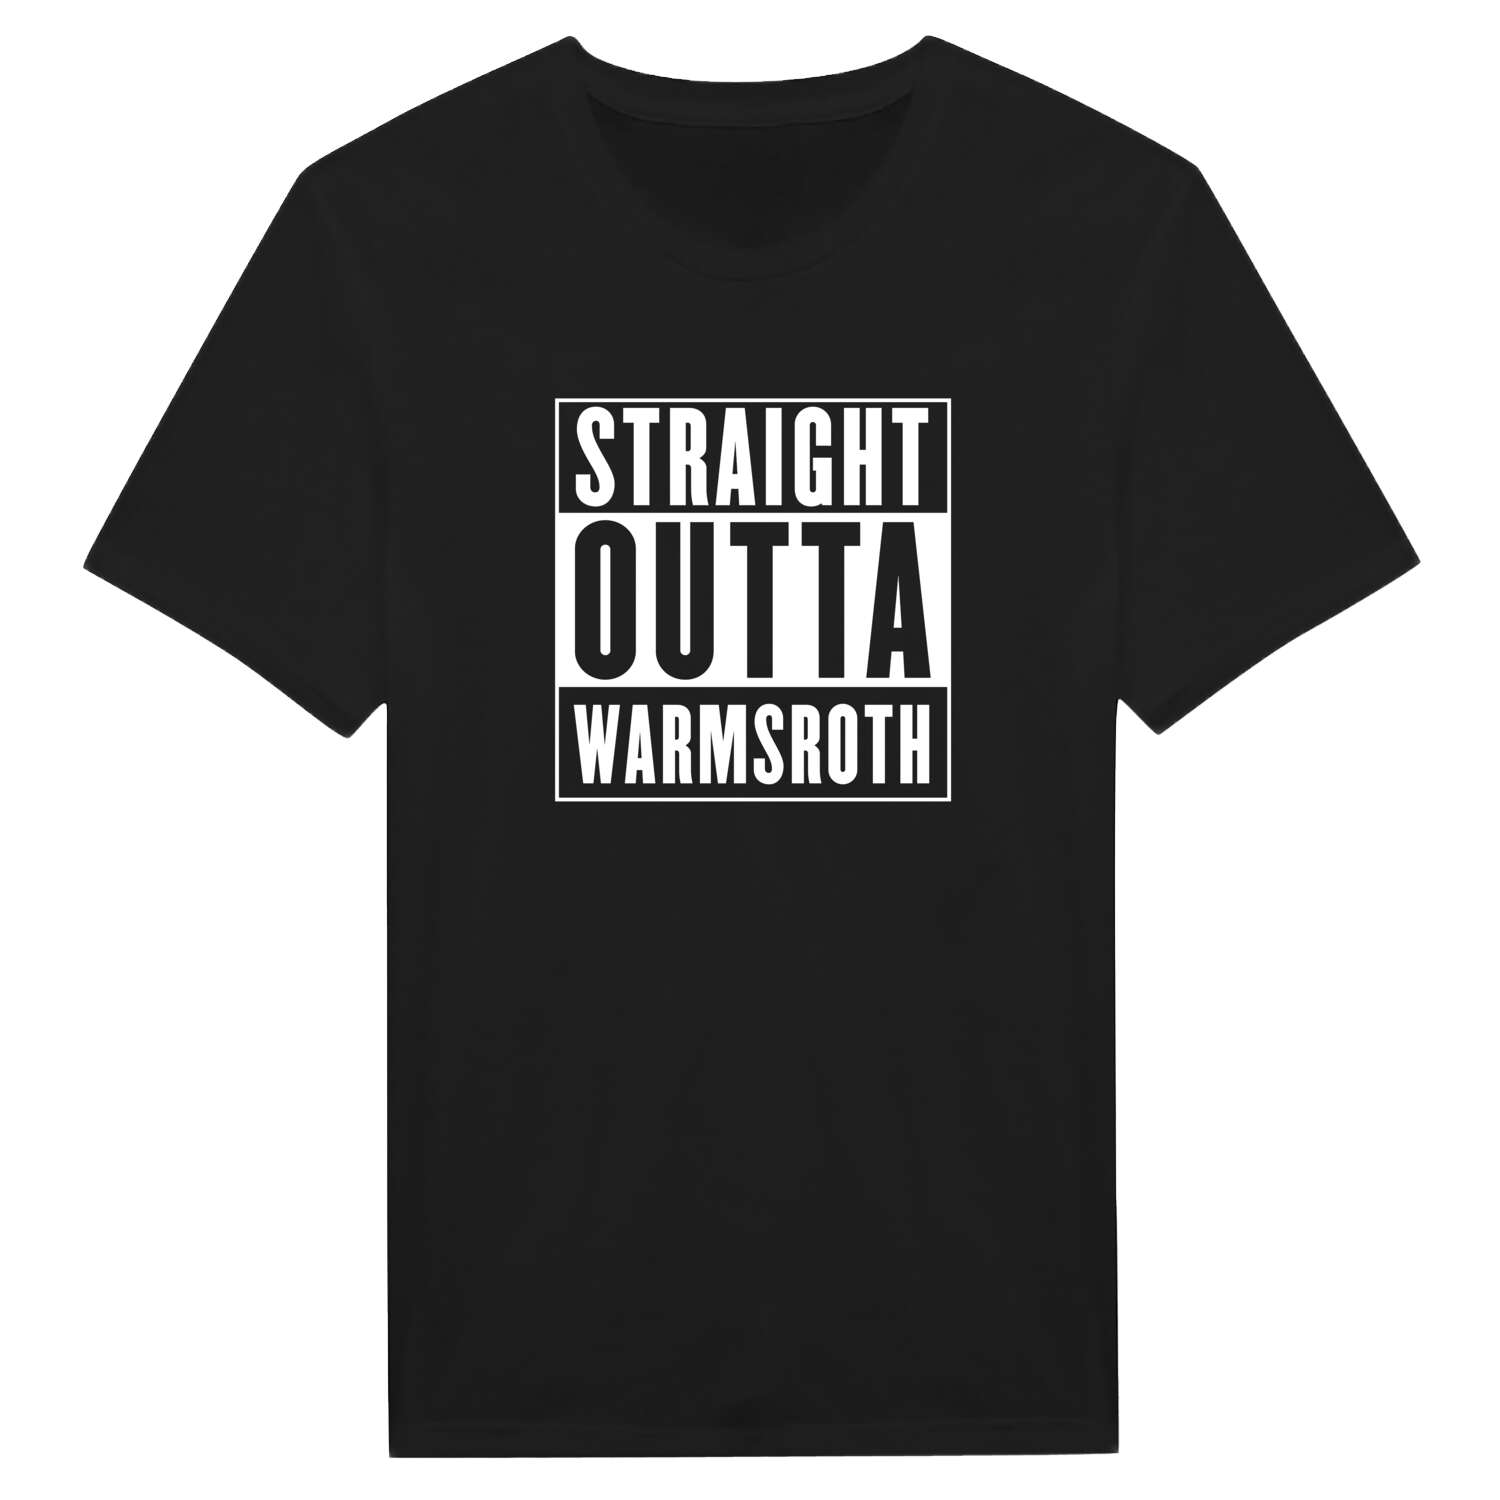 Warmsroth T-Shirt »Straight Outta«